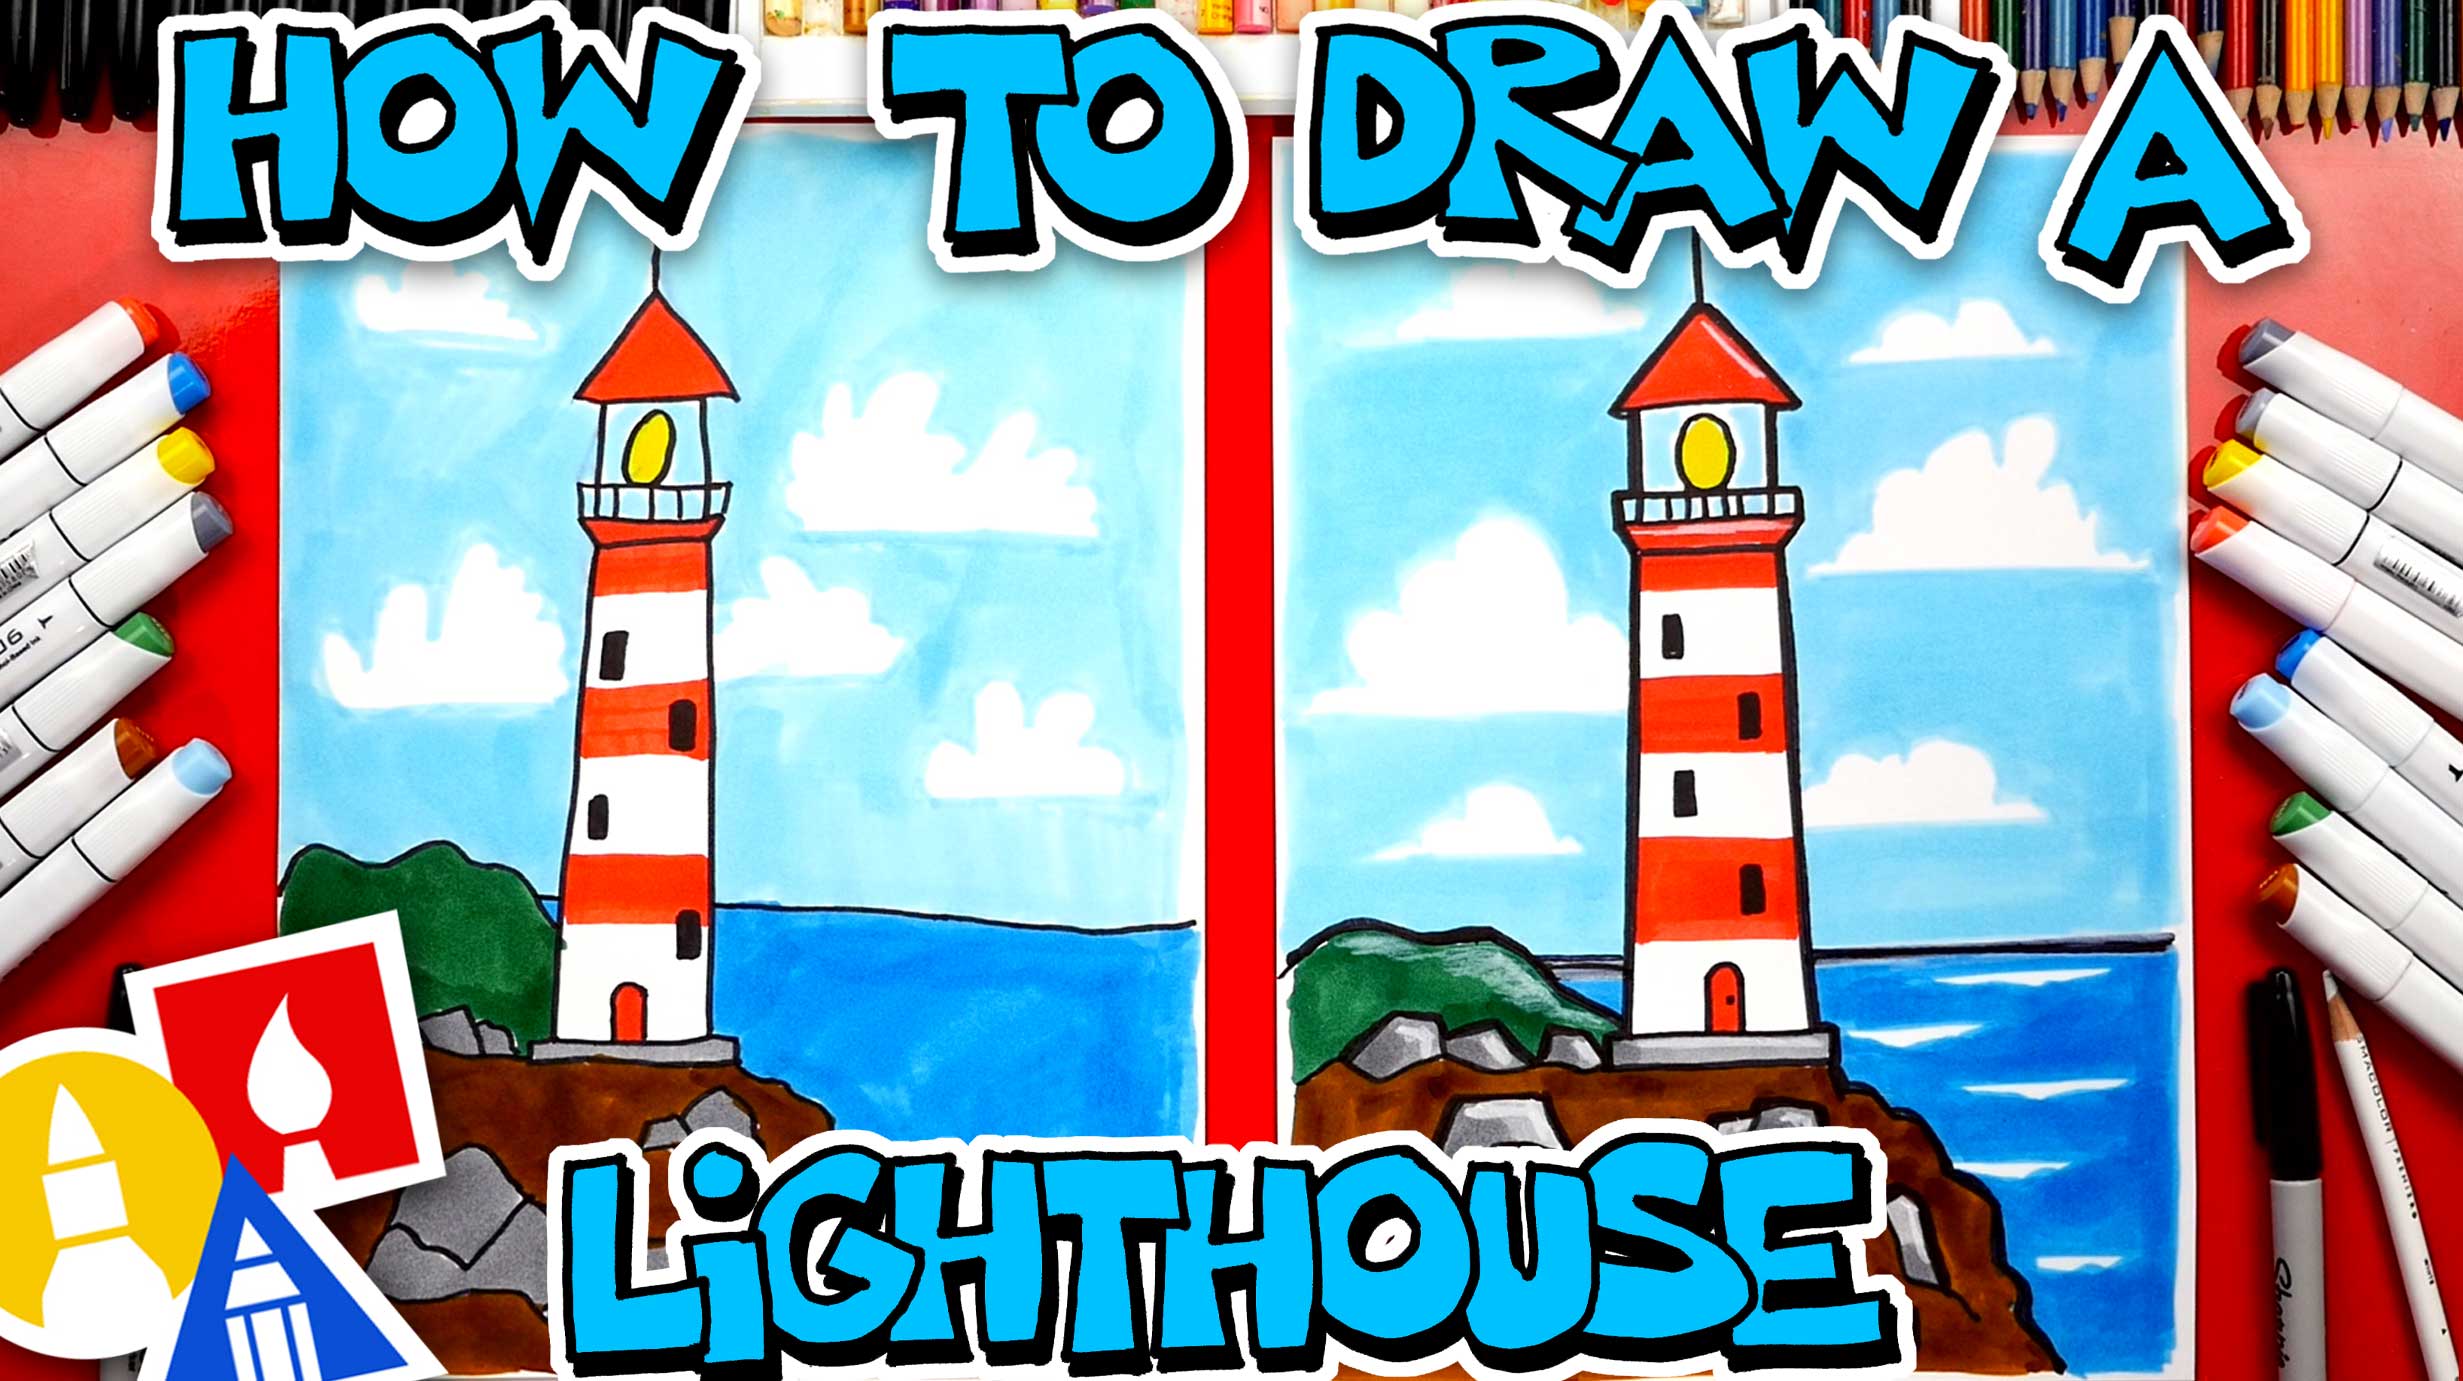 How To Draw A Lighthouse - Art For Kids Hub